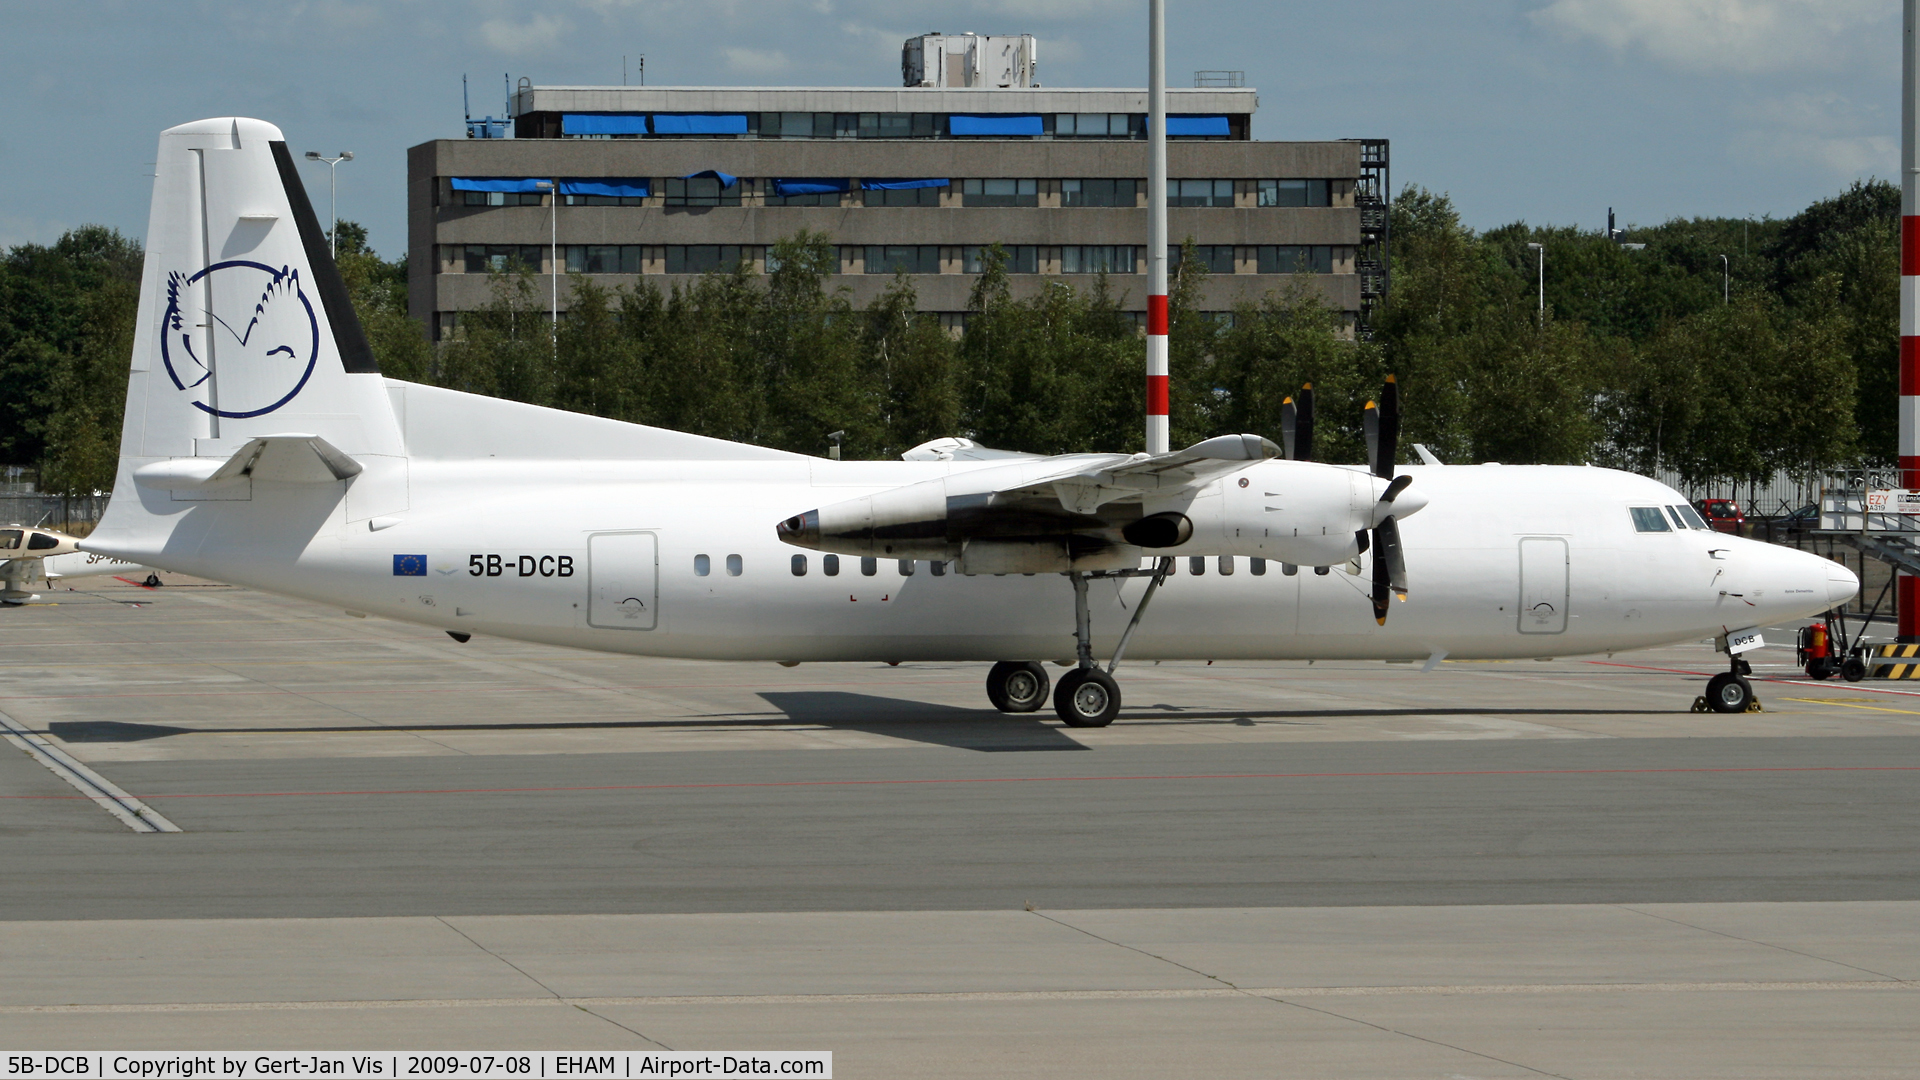 5B-DCB, 1991 Fokker 50 C/N 20230, Standing at the east-ramp